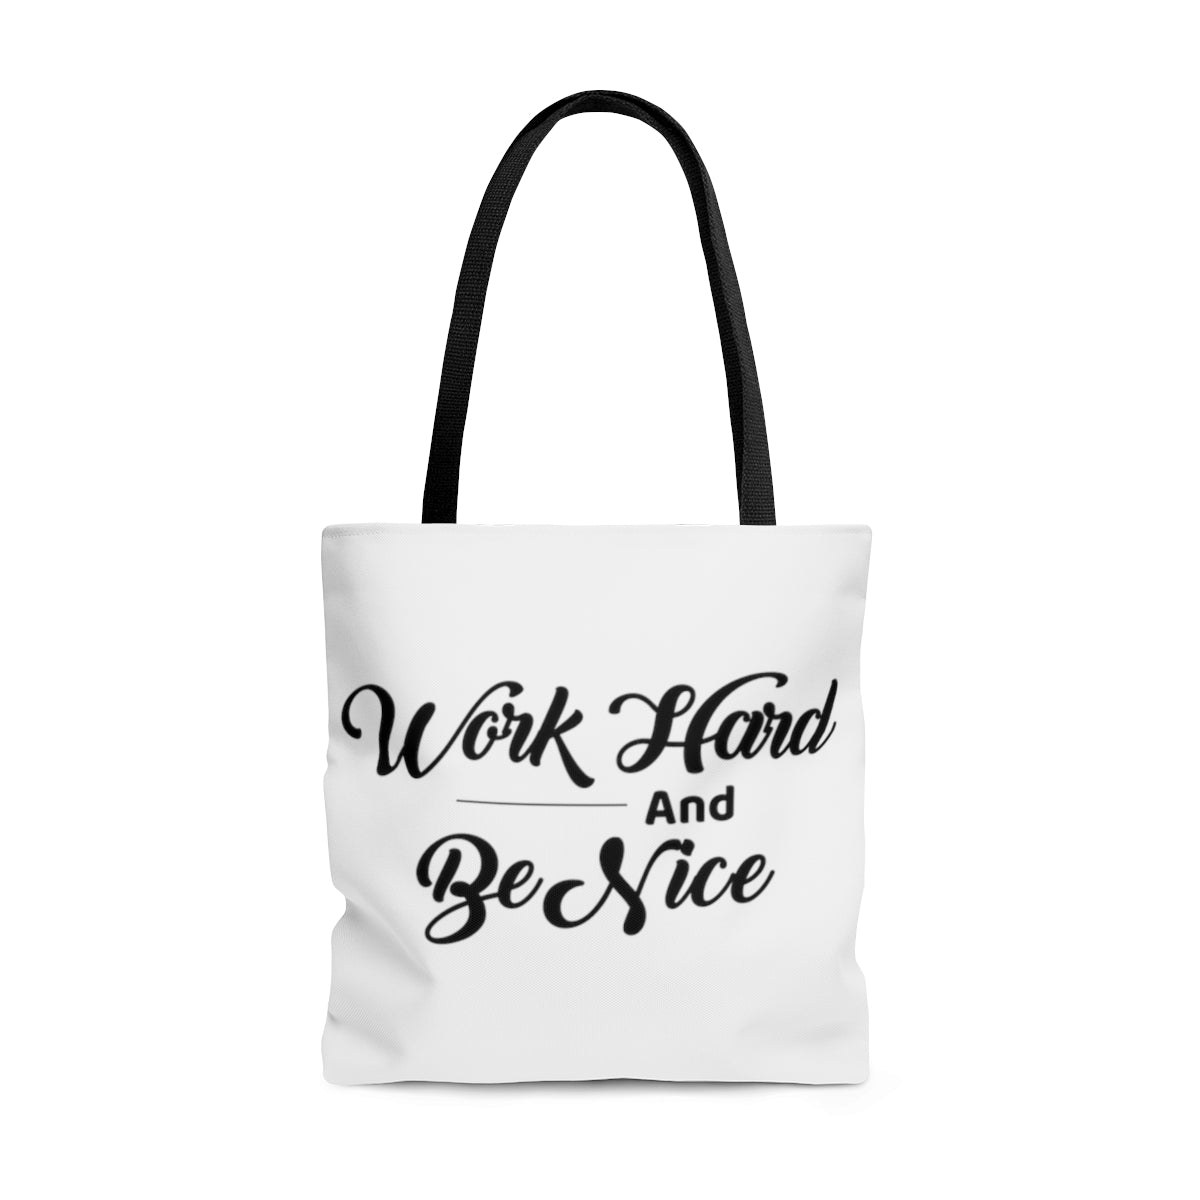 Work Hard and Be Nice Durable Motivational Tote Bag- Inspirational Tote Bag, Laptop Tote Bag, Office Tote Bag, Self-Care Gift Tote Bag, Tote Purse